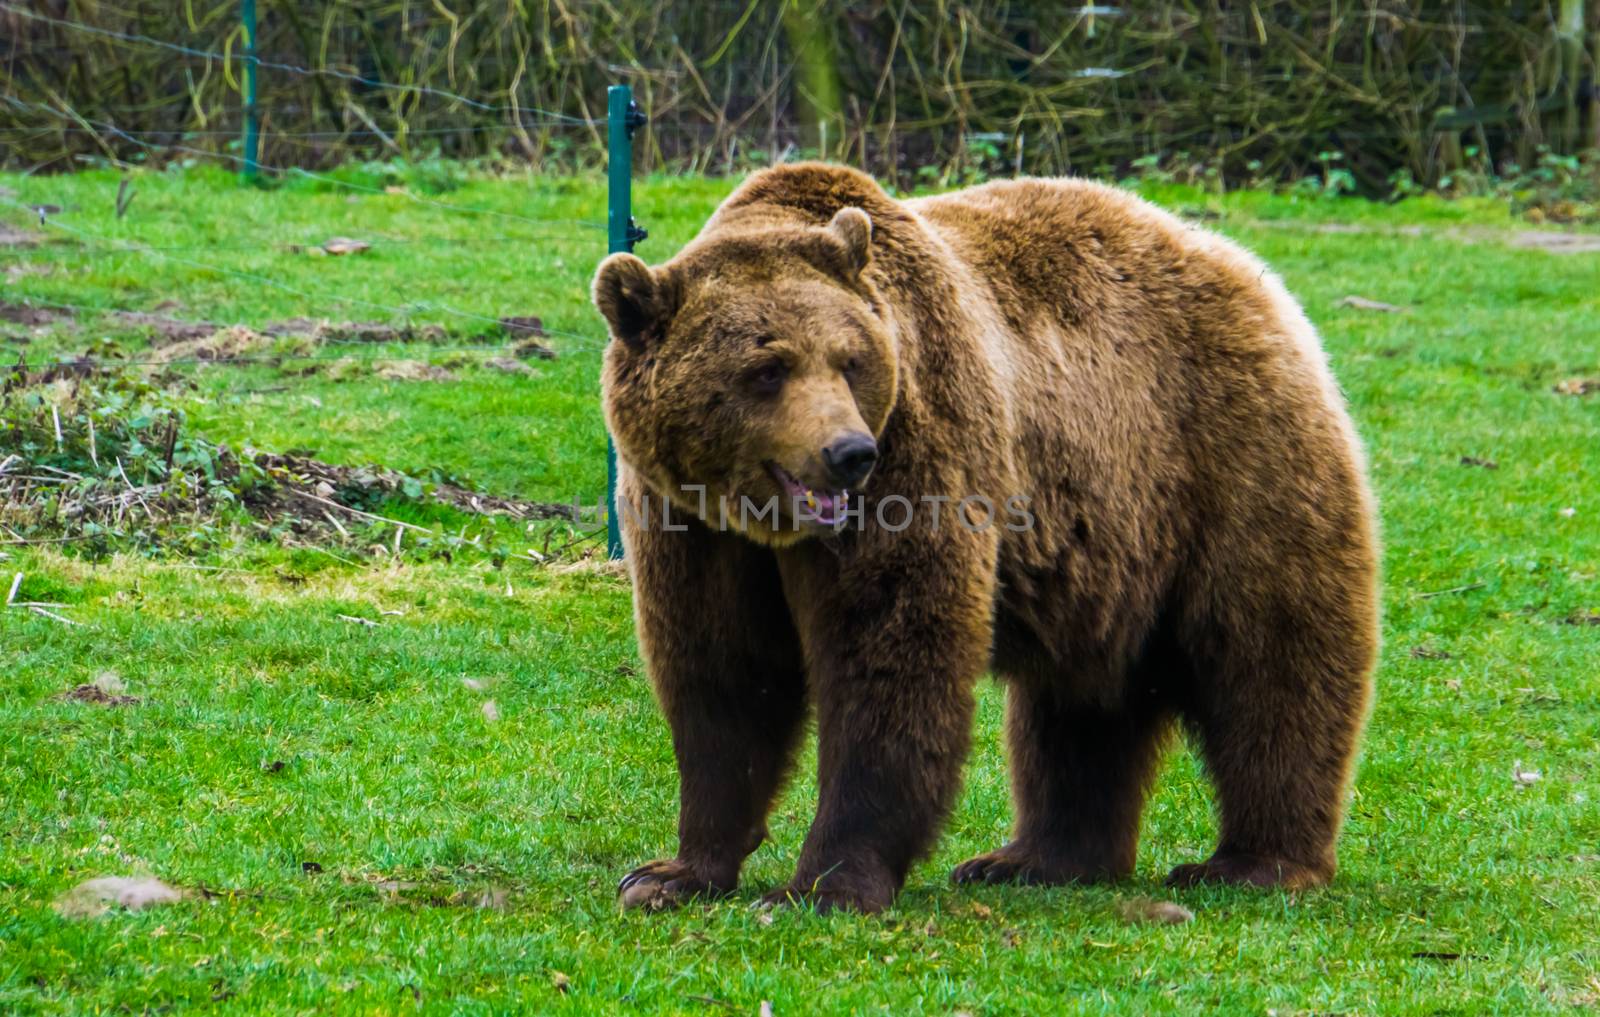 closeup portrait of a brown bear standing in the grass, common animal in Eurasia and north America, Popular zoo animals by charlottebleijenberg